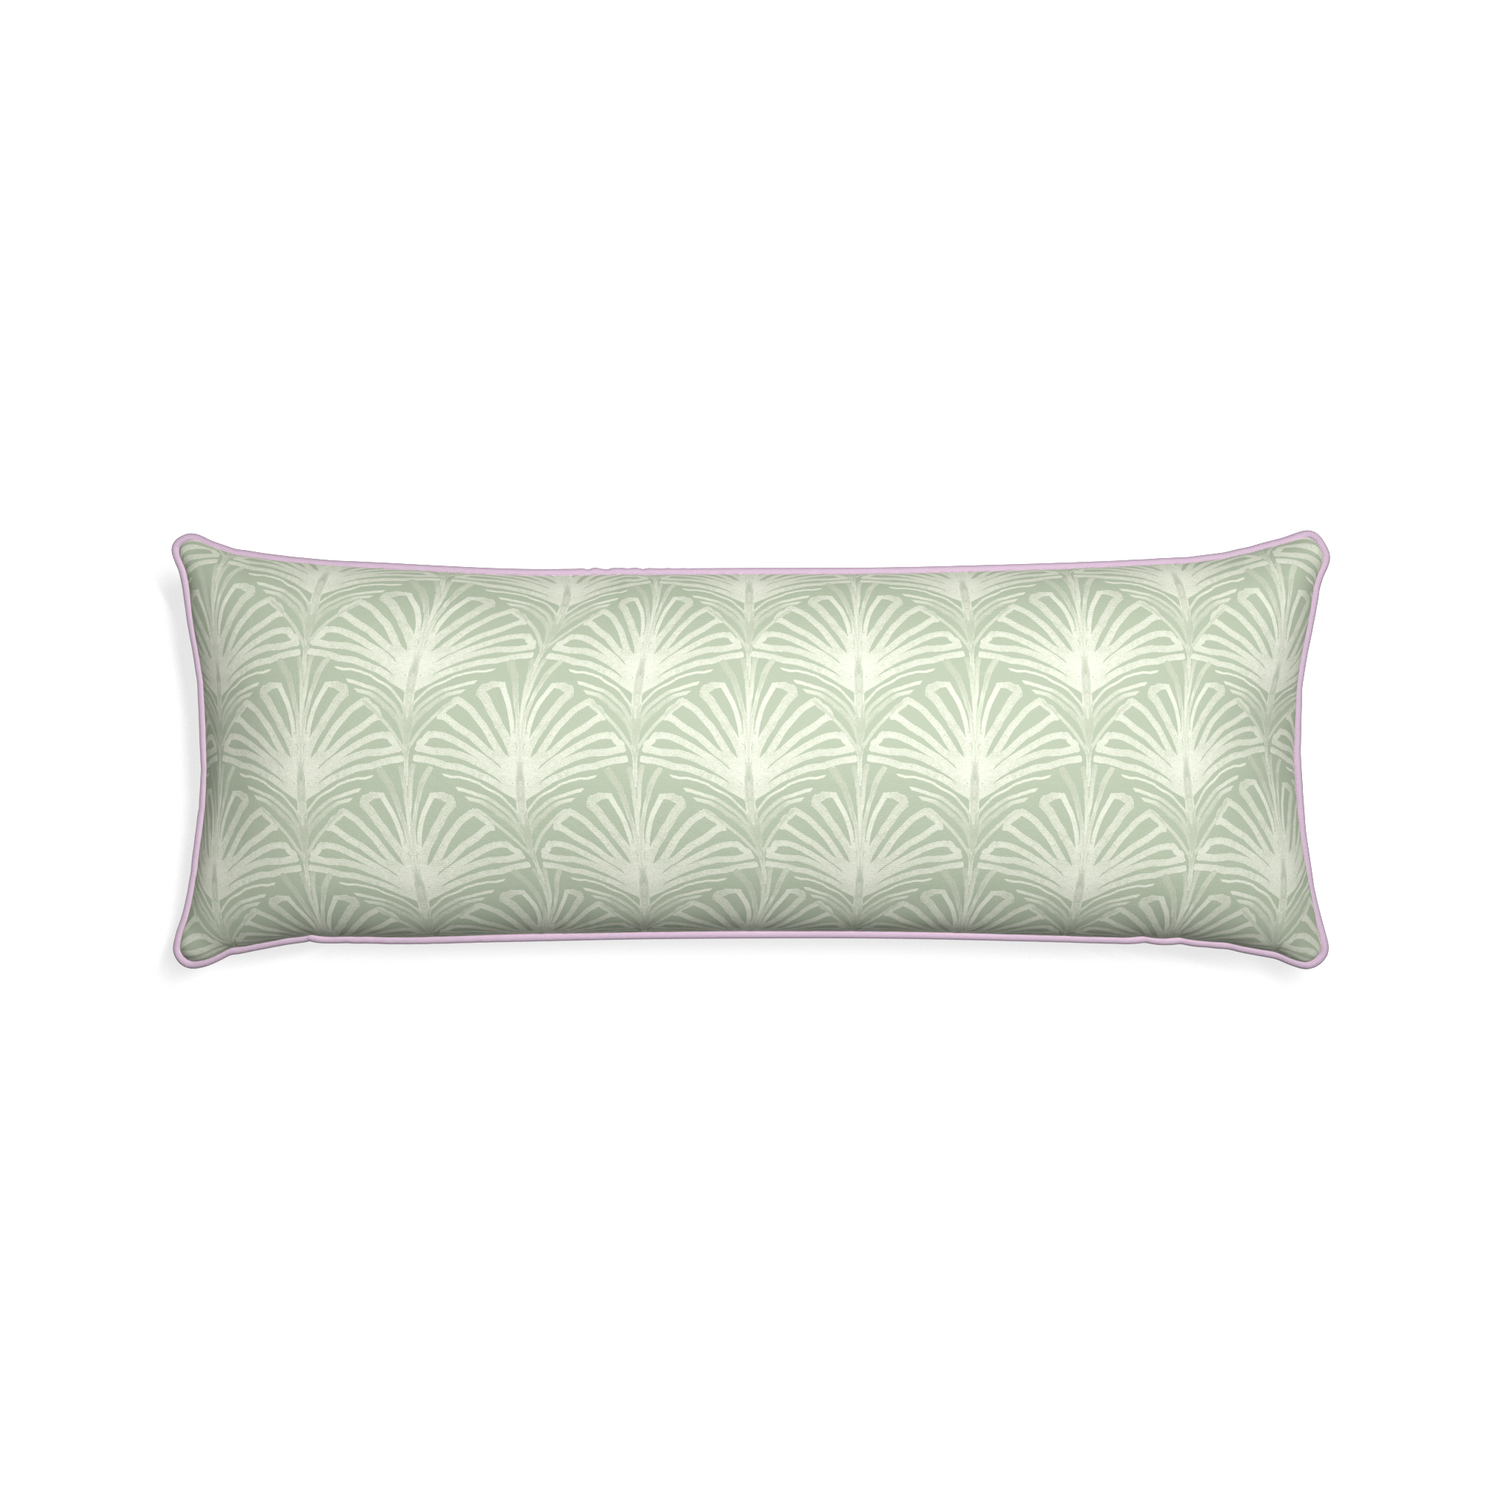 Xl-lumbar suzy sage custom pillow with l piping on white background